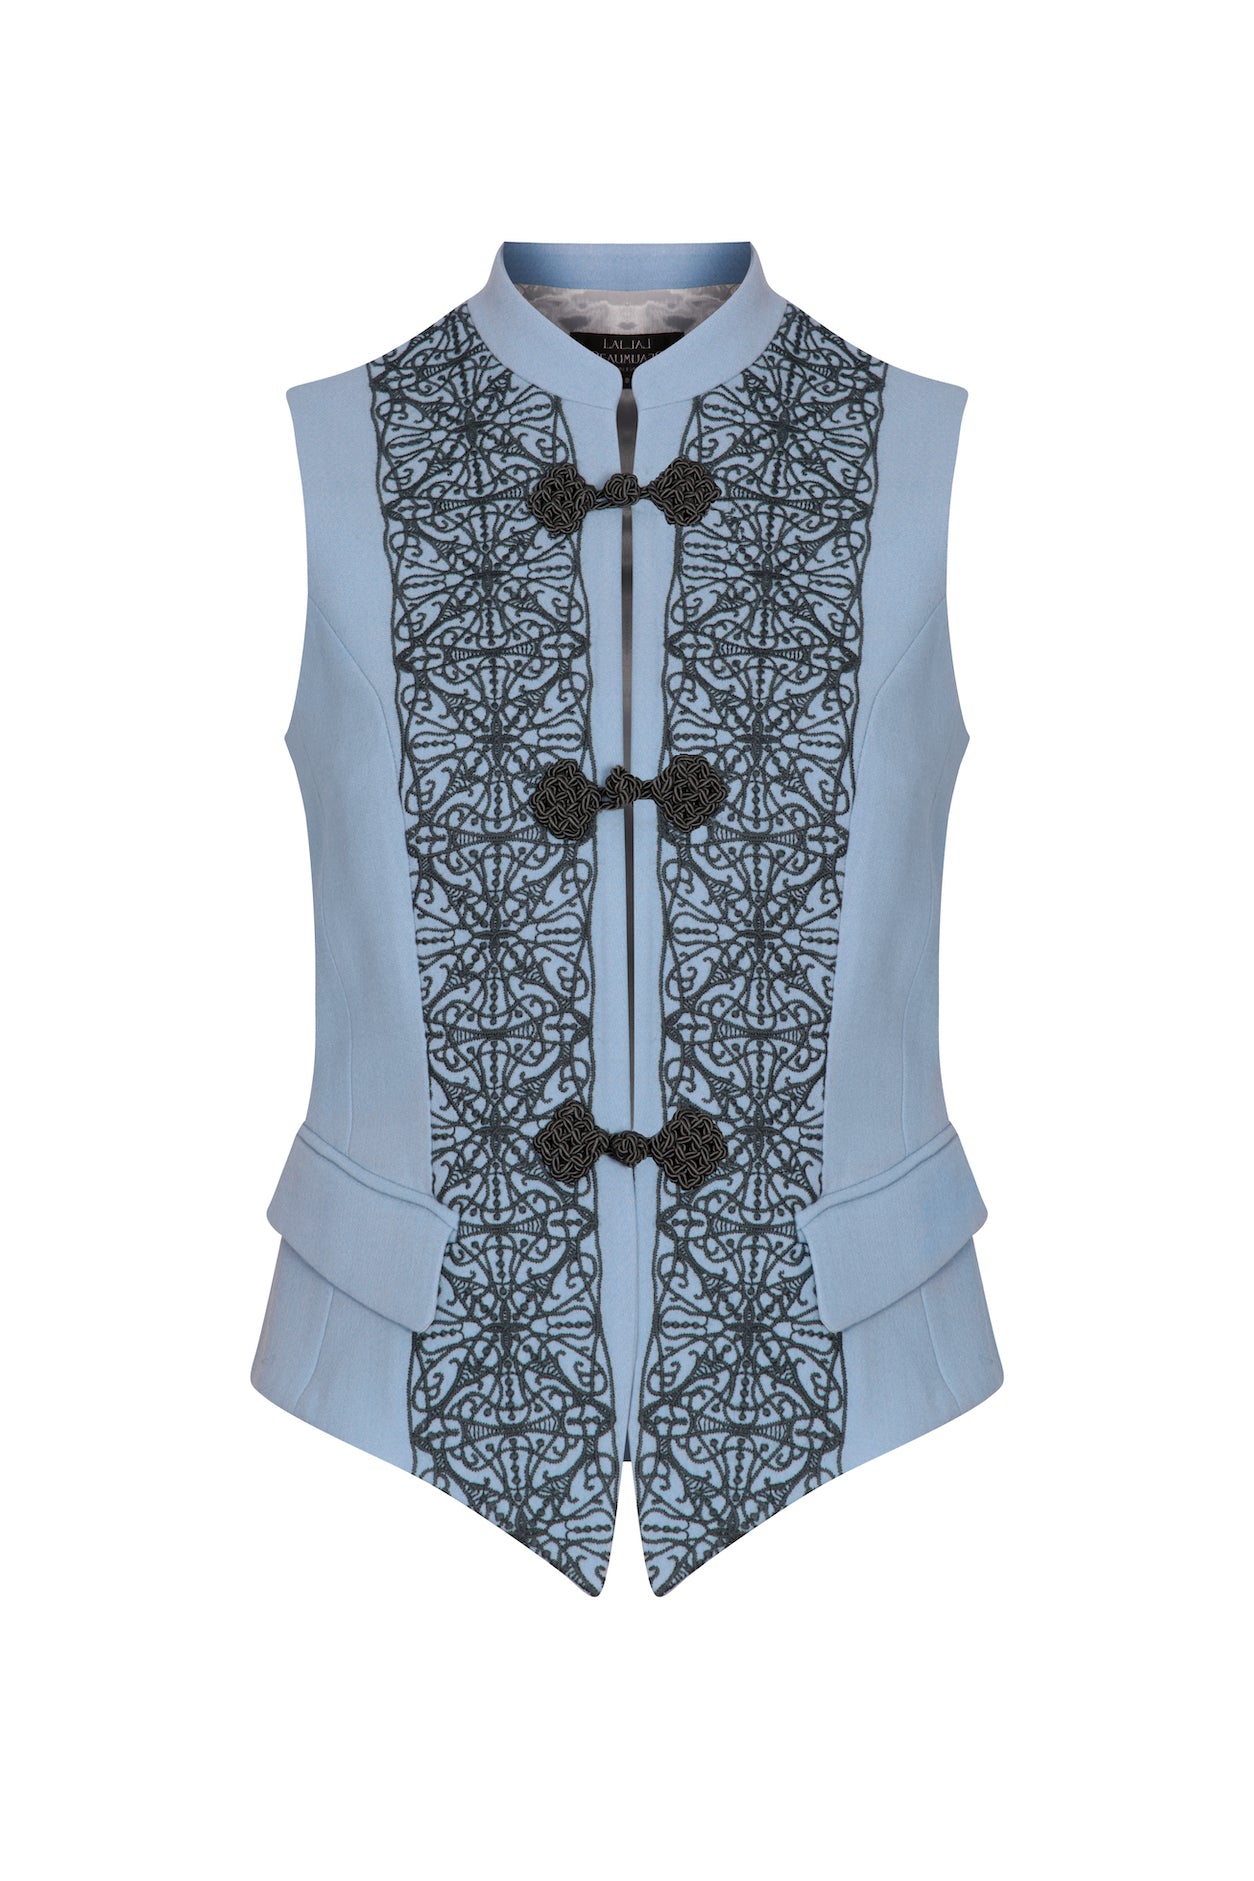 Waistcoat in Embroidered Sky Faille with Grey Frogging Fastening - Wendy